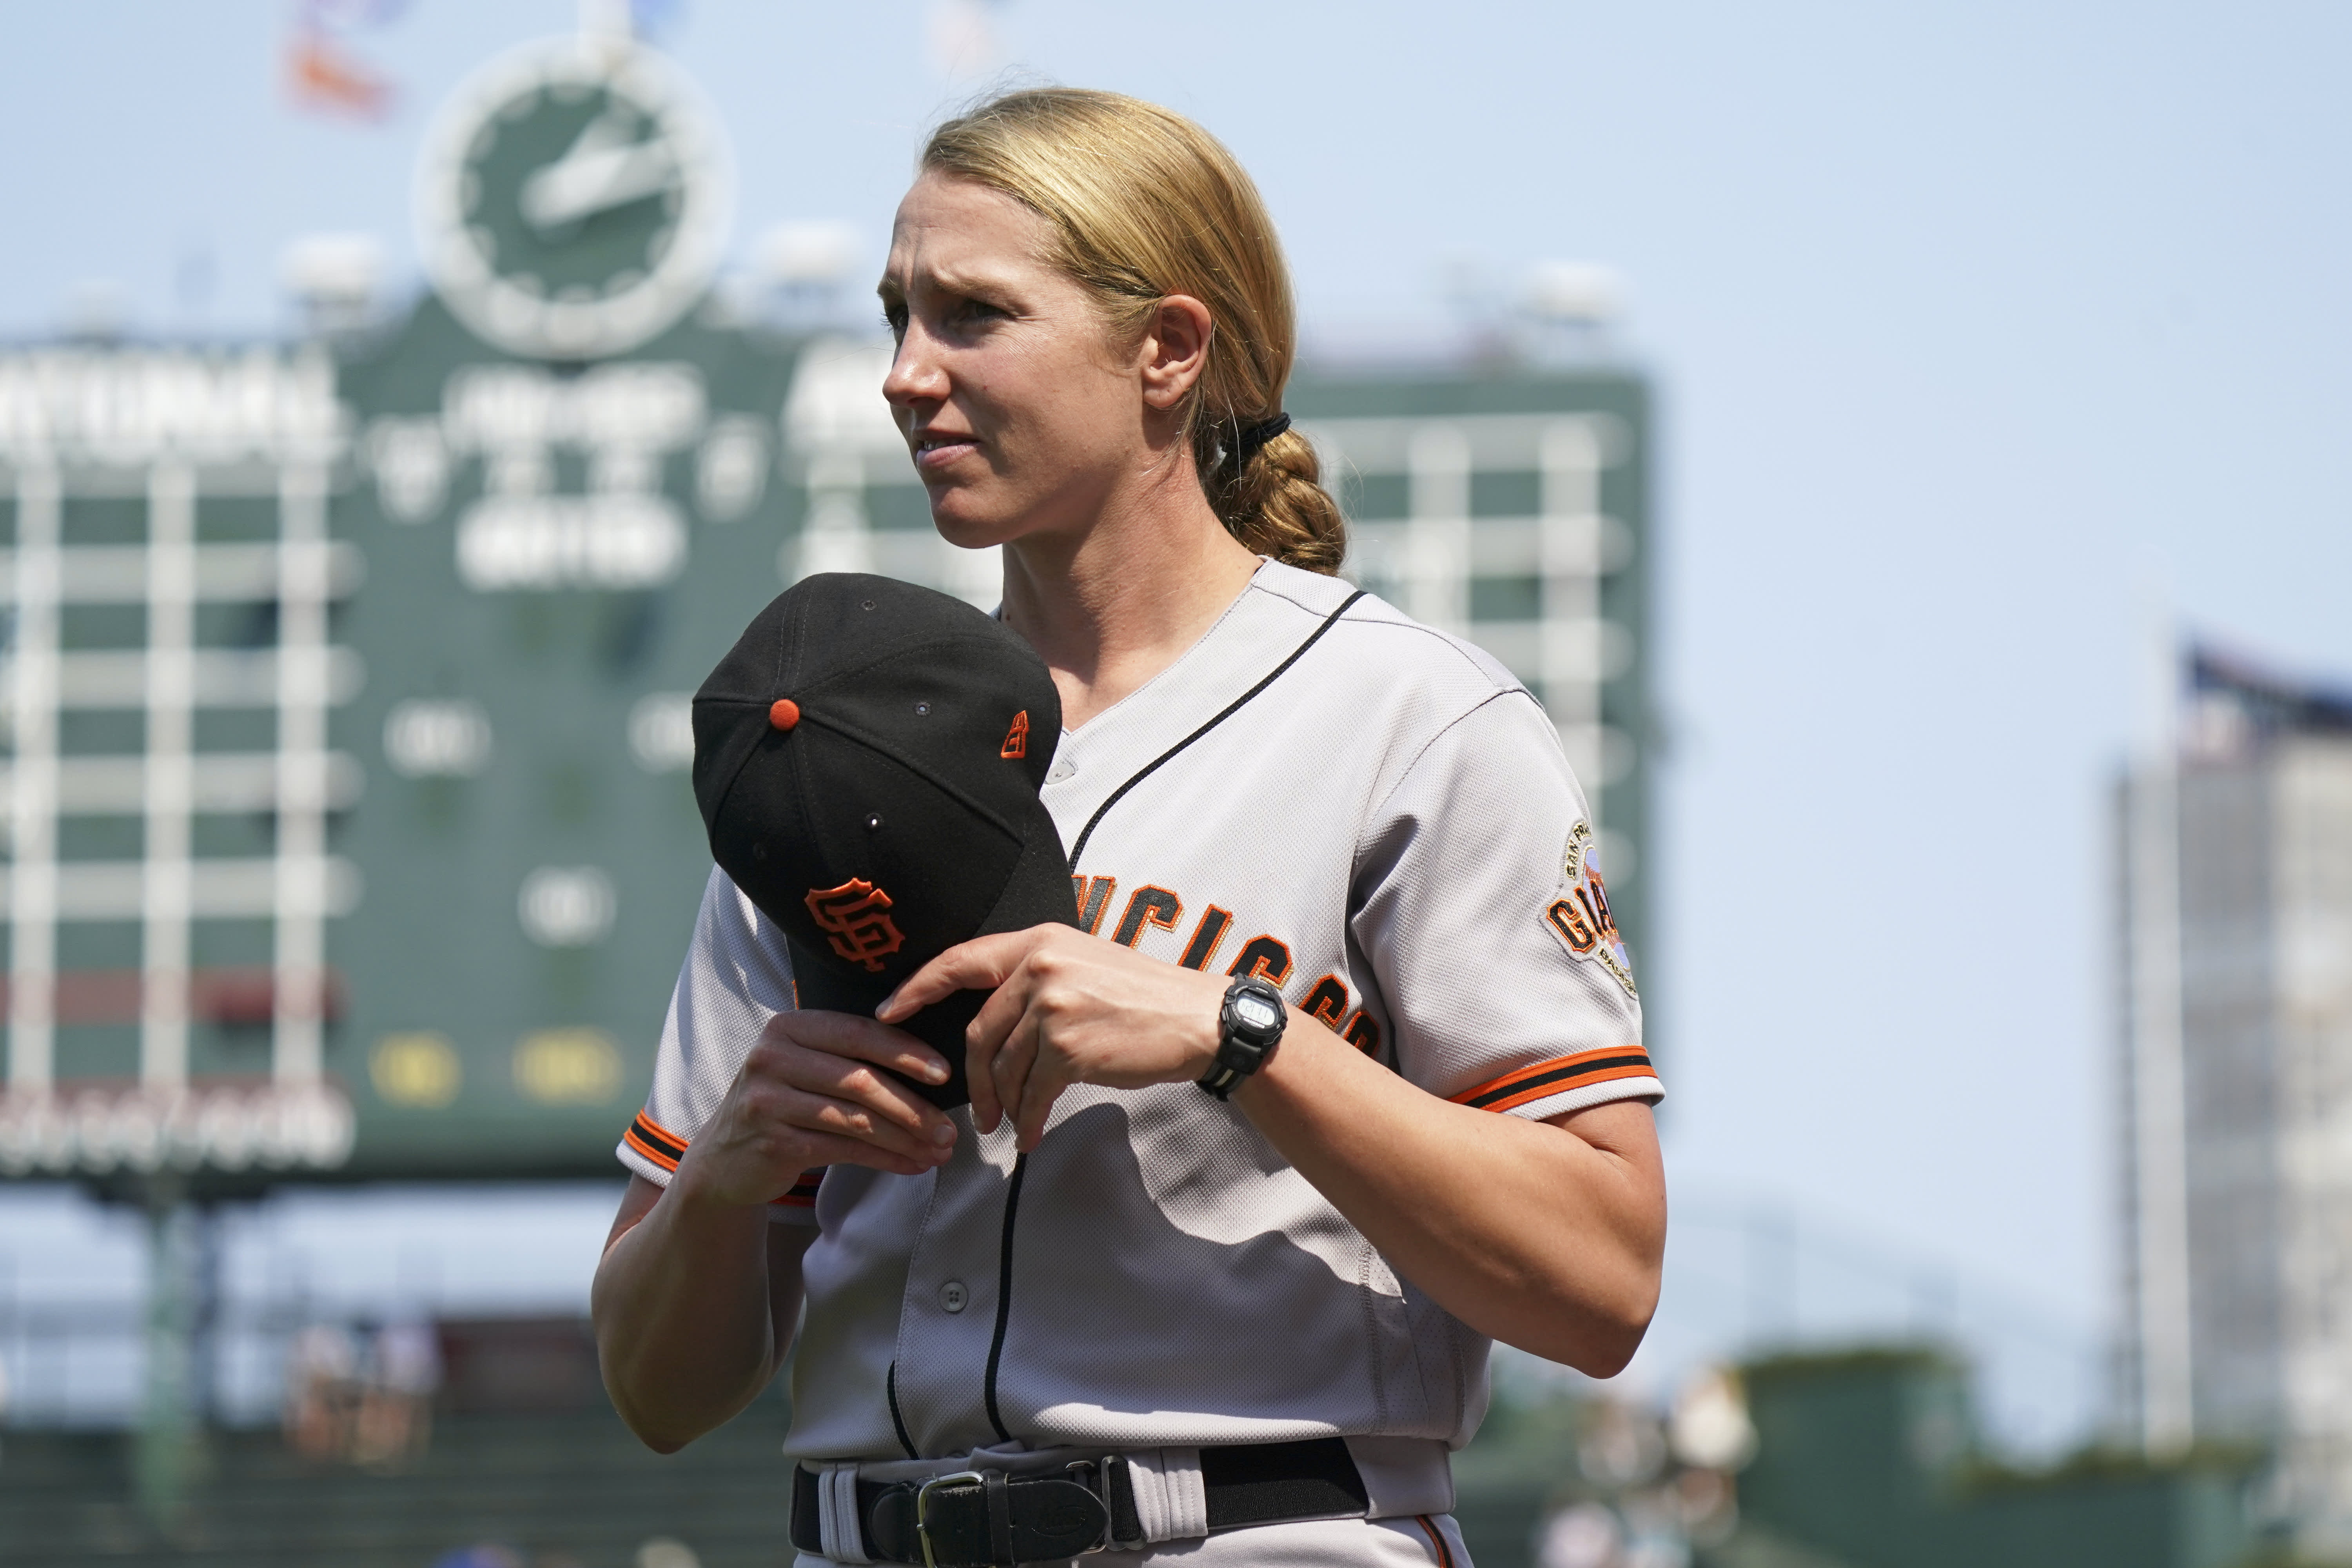 Giants' Alyssa Nakken becomes the first woman to coach on field in MLB